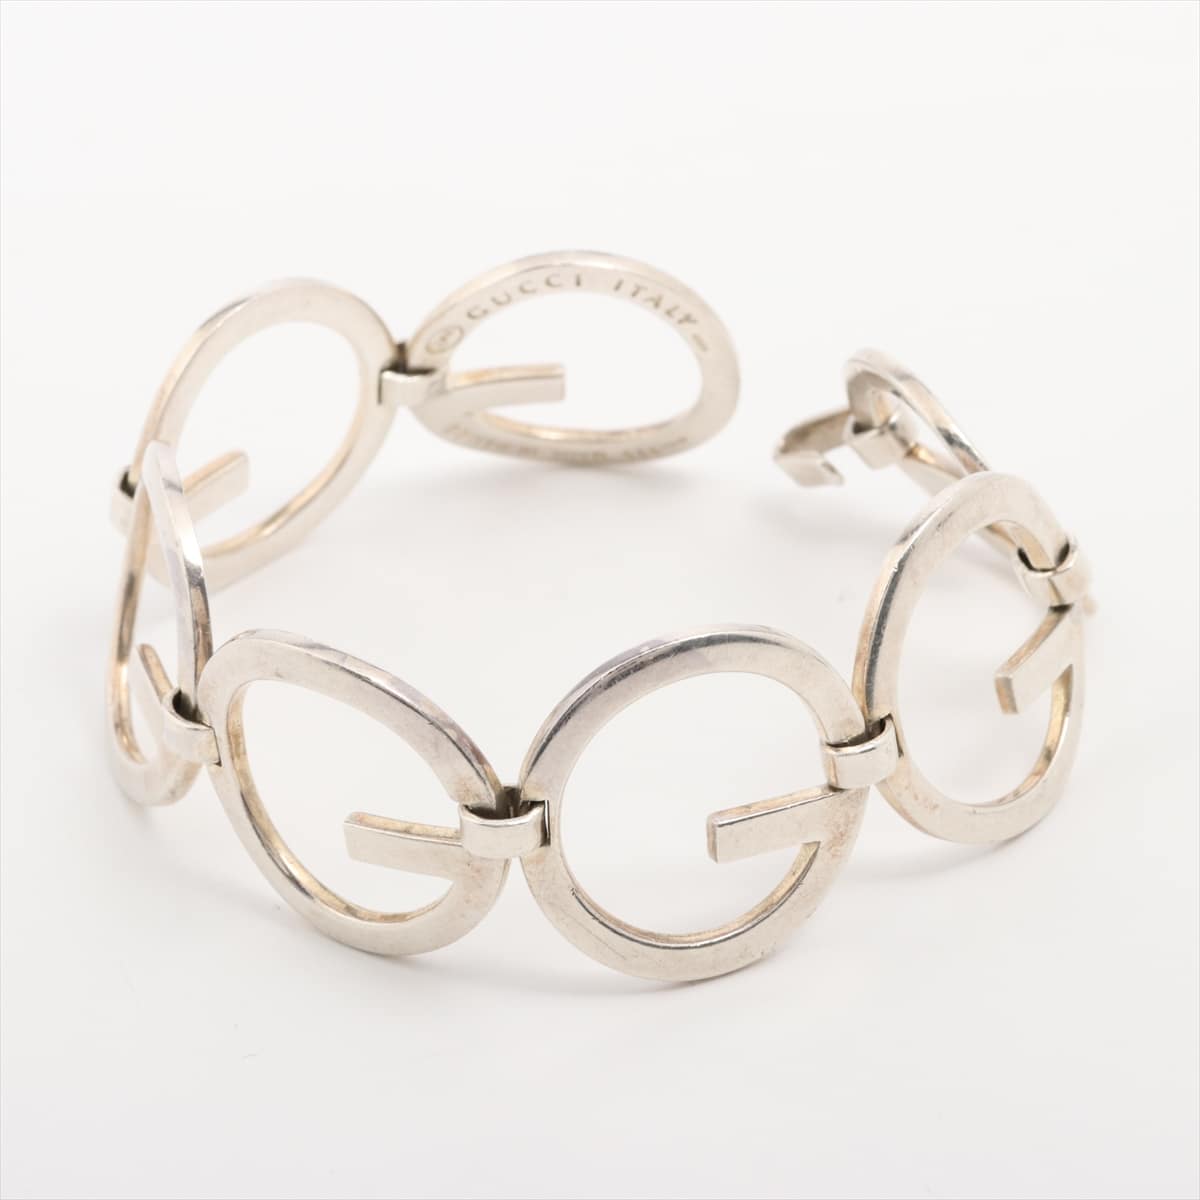 Gucci Old Gucci Bracelet 925 34.2g Silver Made in Mexico